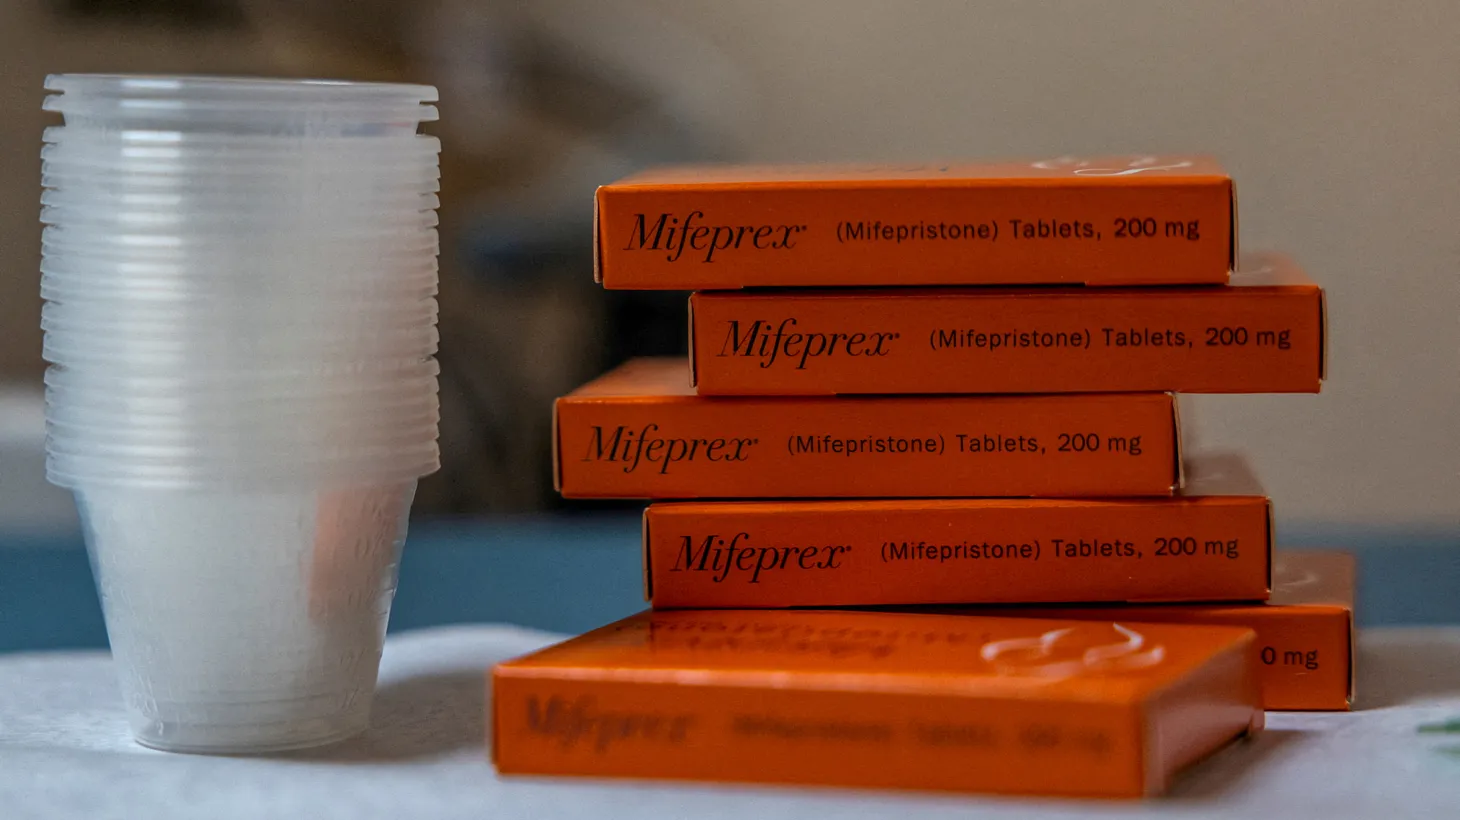 Boxes of mifepristone, the first pill given in a medical abortion, are prepared for patients at Women's Reproductive Clinic of New Mexico in Santa Teresa, U.S., January 13, 2023.